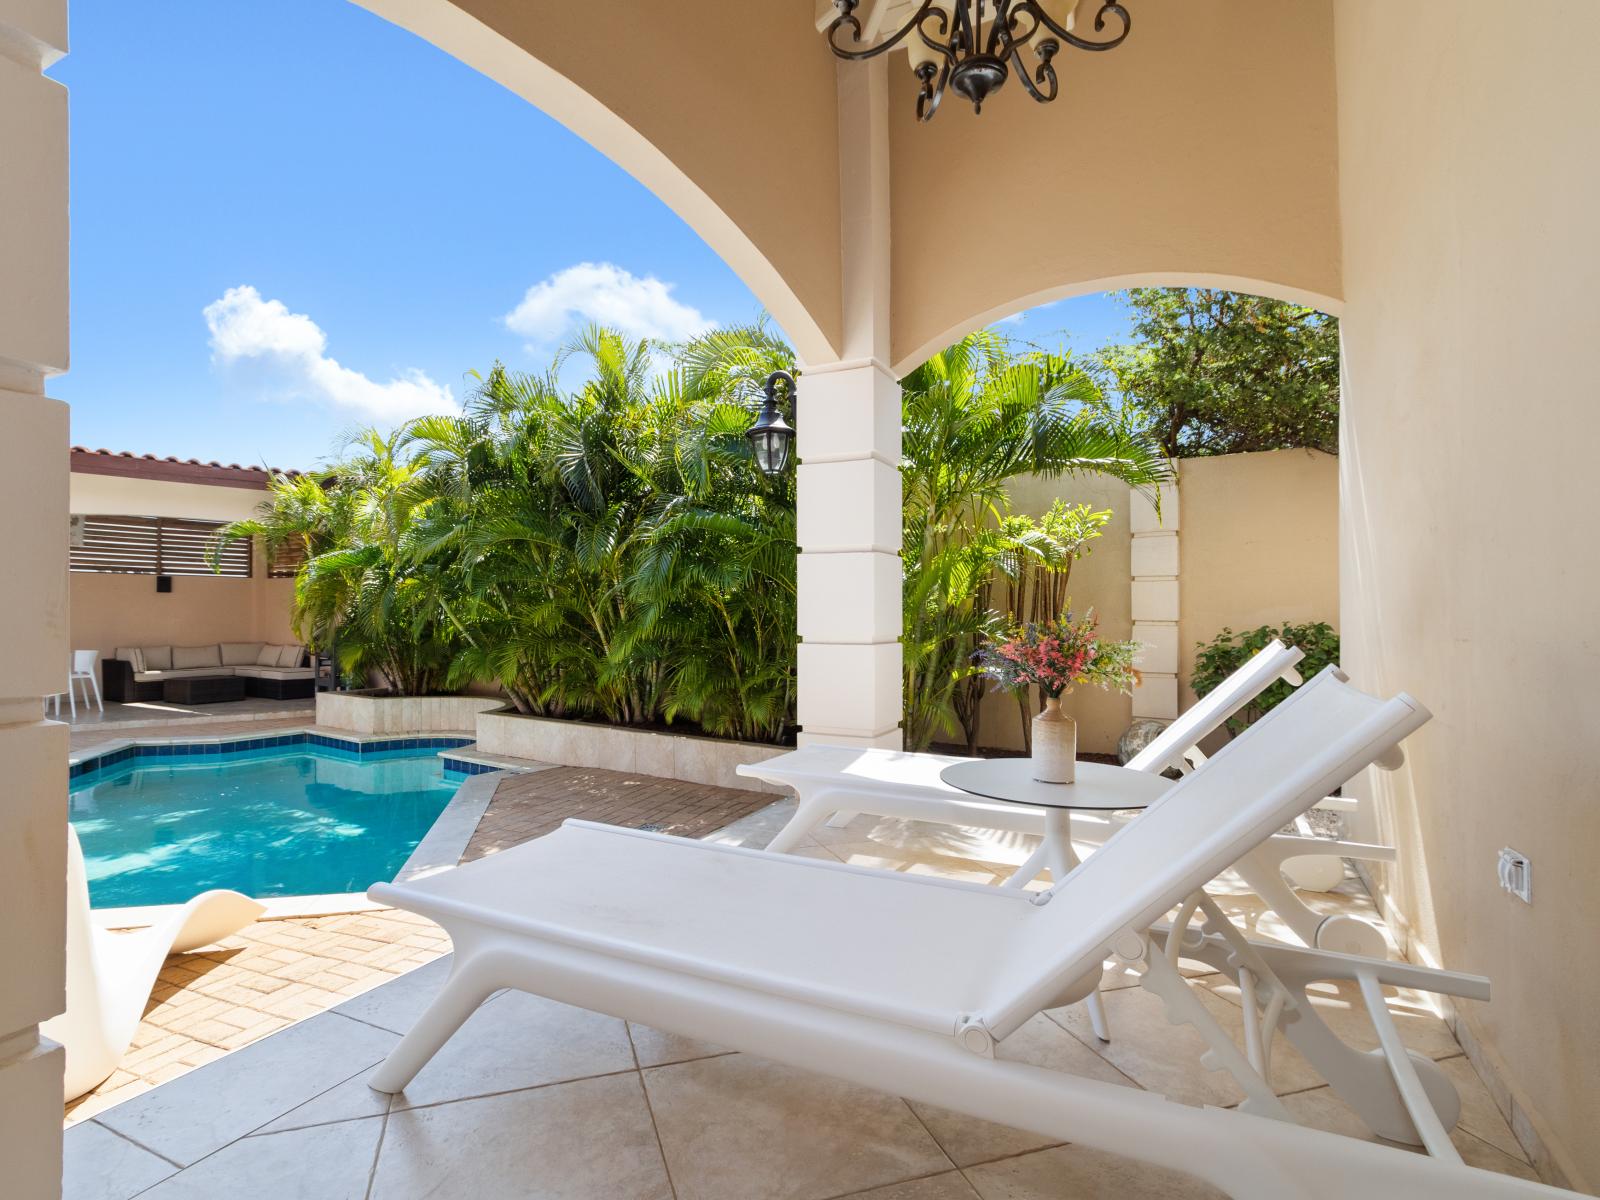 Refresh and unwind: our pool with a stylish lounge area invites you to relax and soak up the sun.